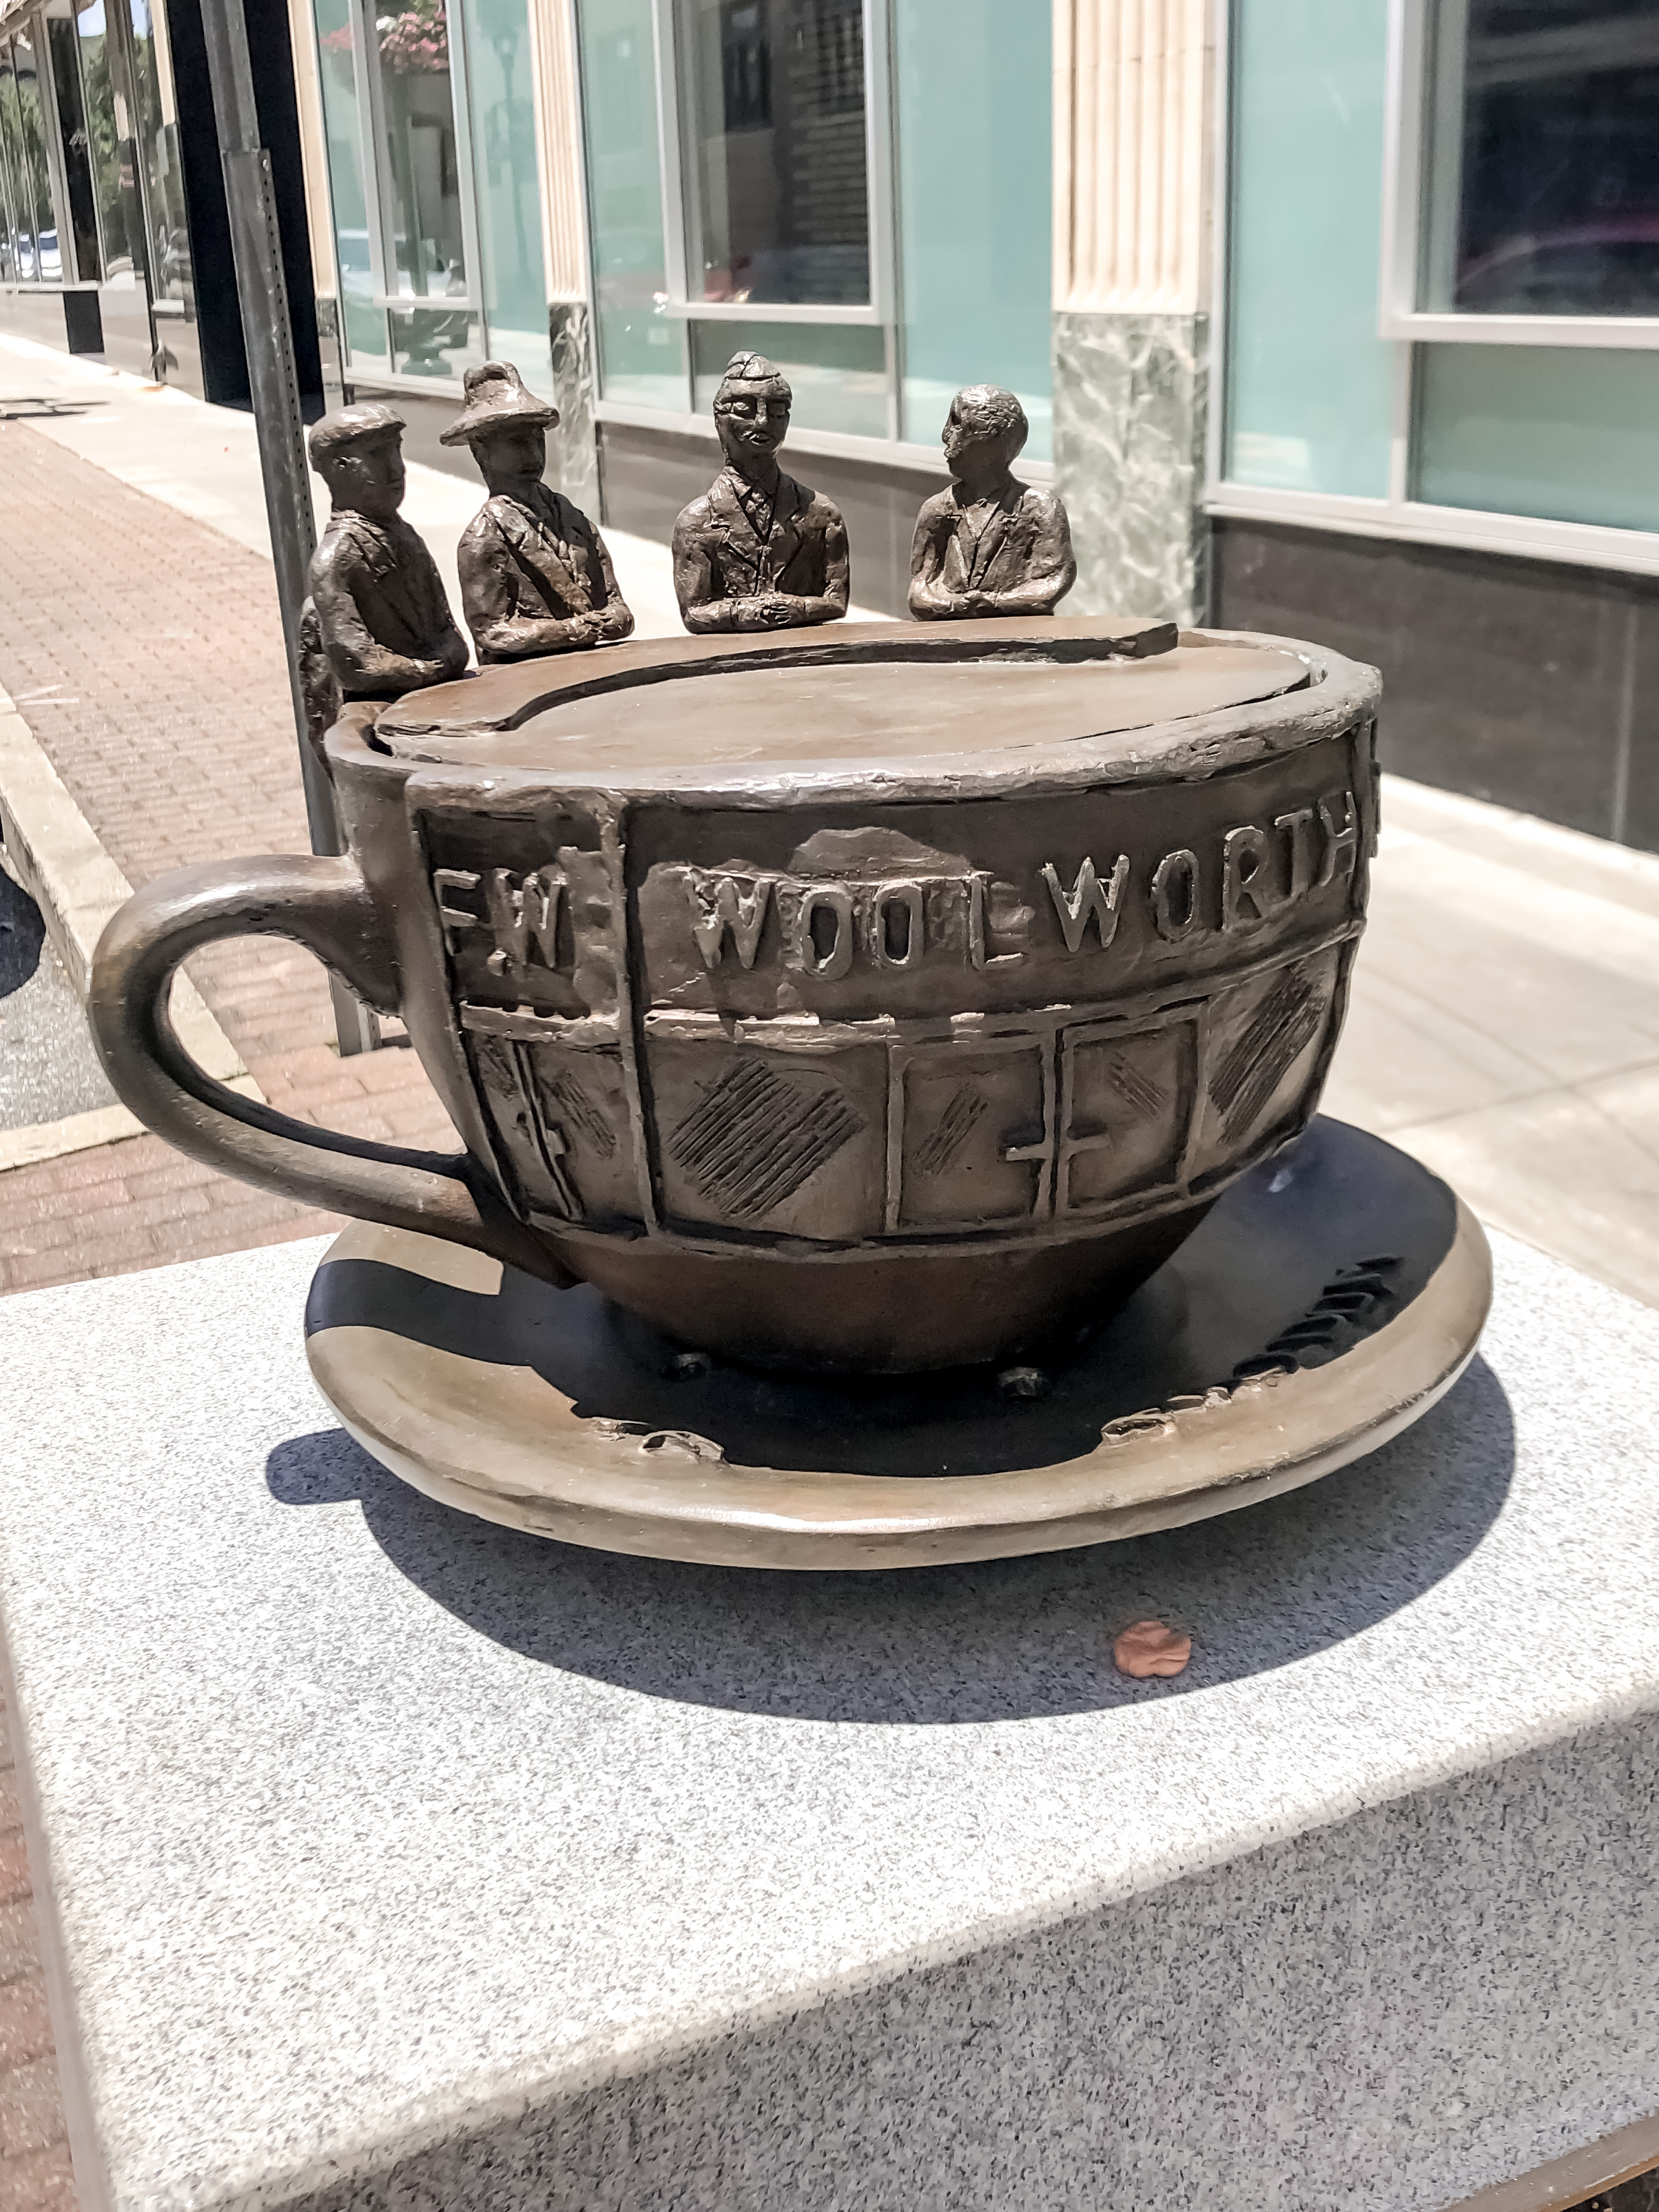 Coffee Cup celebrating 50th anniversary of the Woolworth's Lunch Counter Sit-in. Greensboro, NC. 